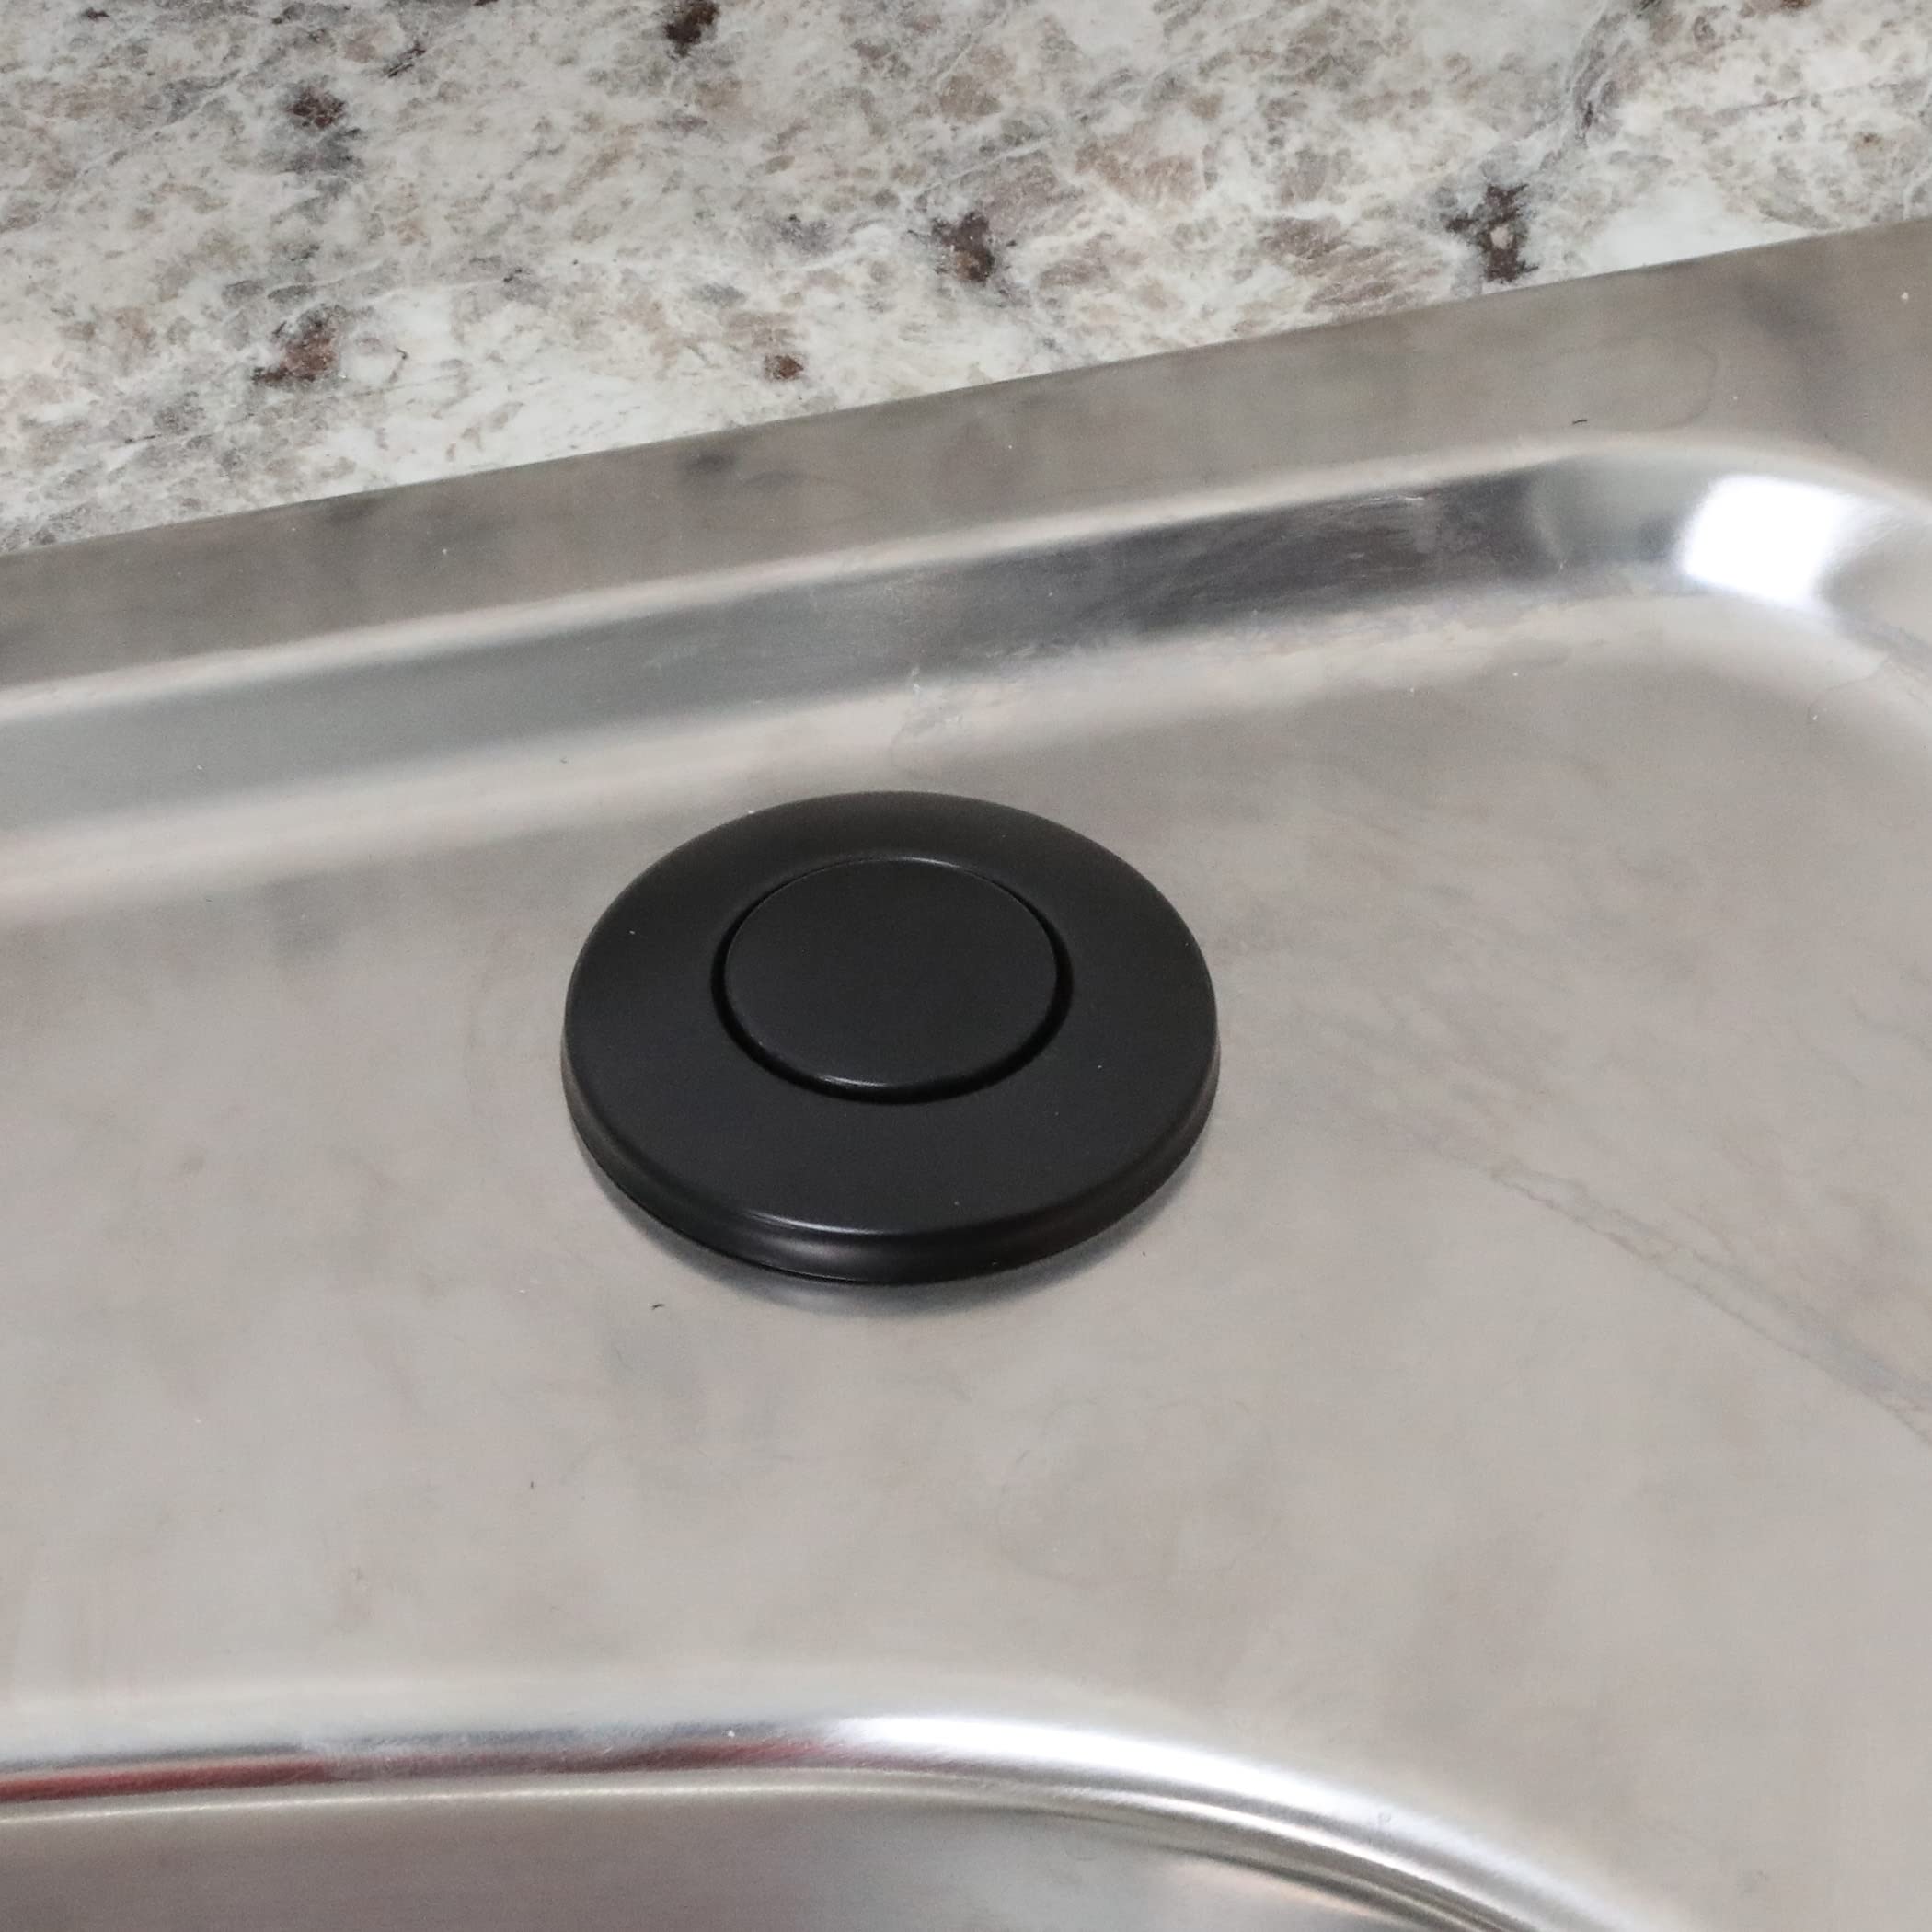 Danco 12067 Sink Top Mount Air Switch Replacement Button, Matte Black